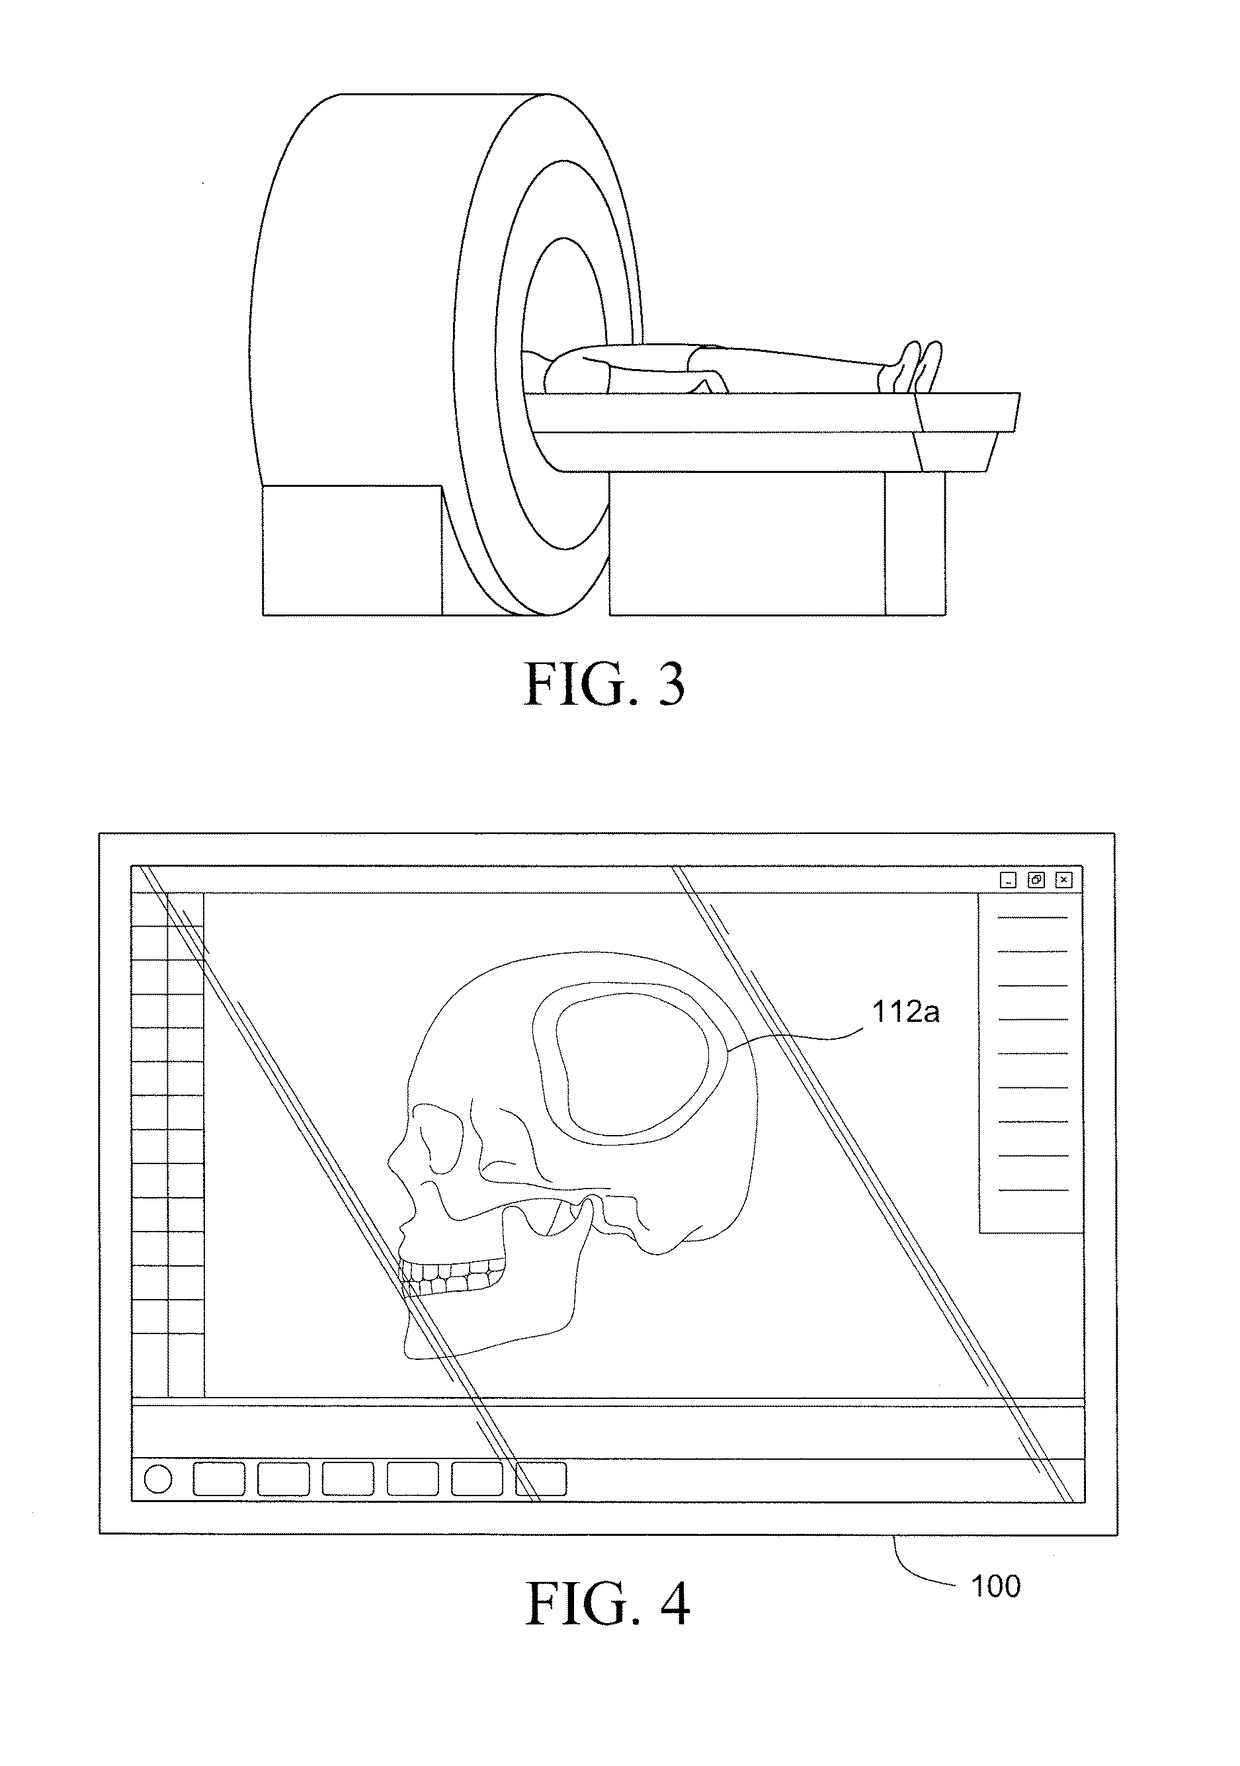 Method for manufacturing a low-profile intercranial device and the low-profile intercranial device manufactured thereby